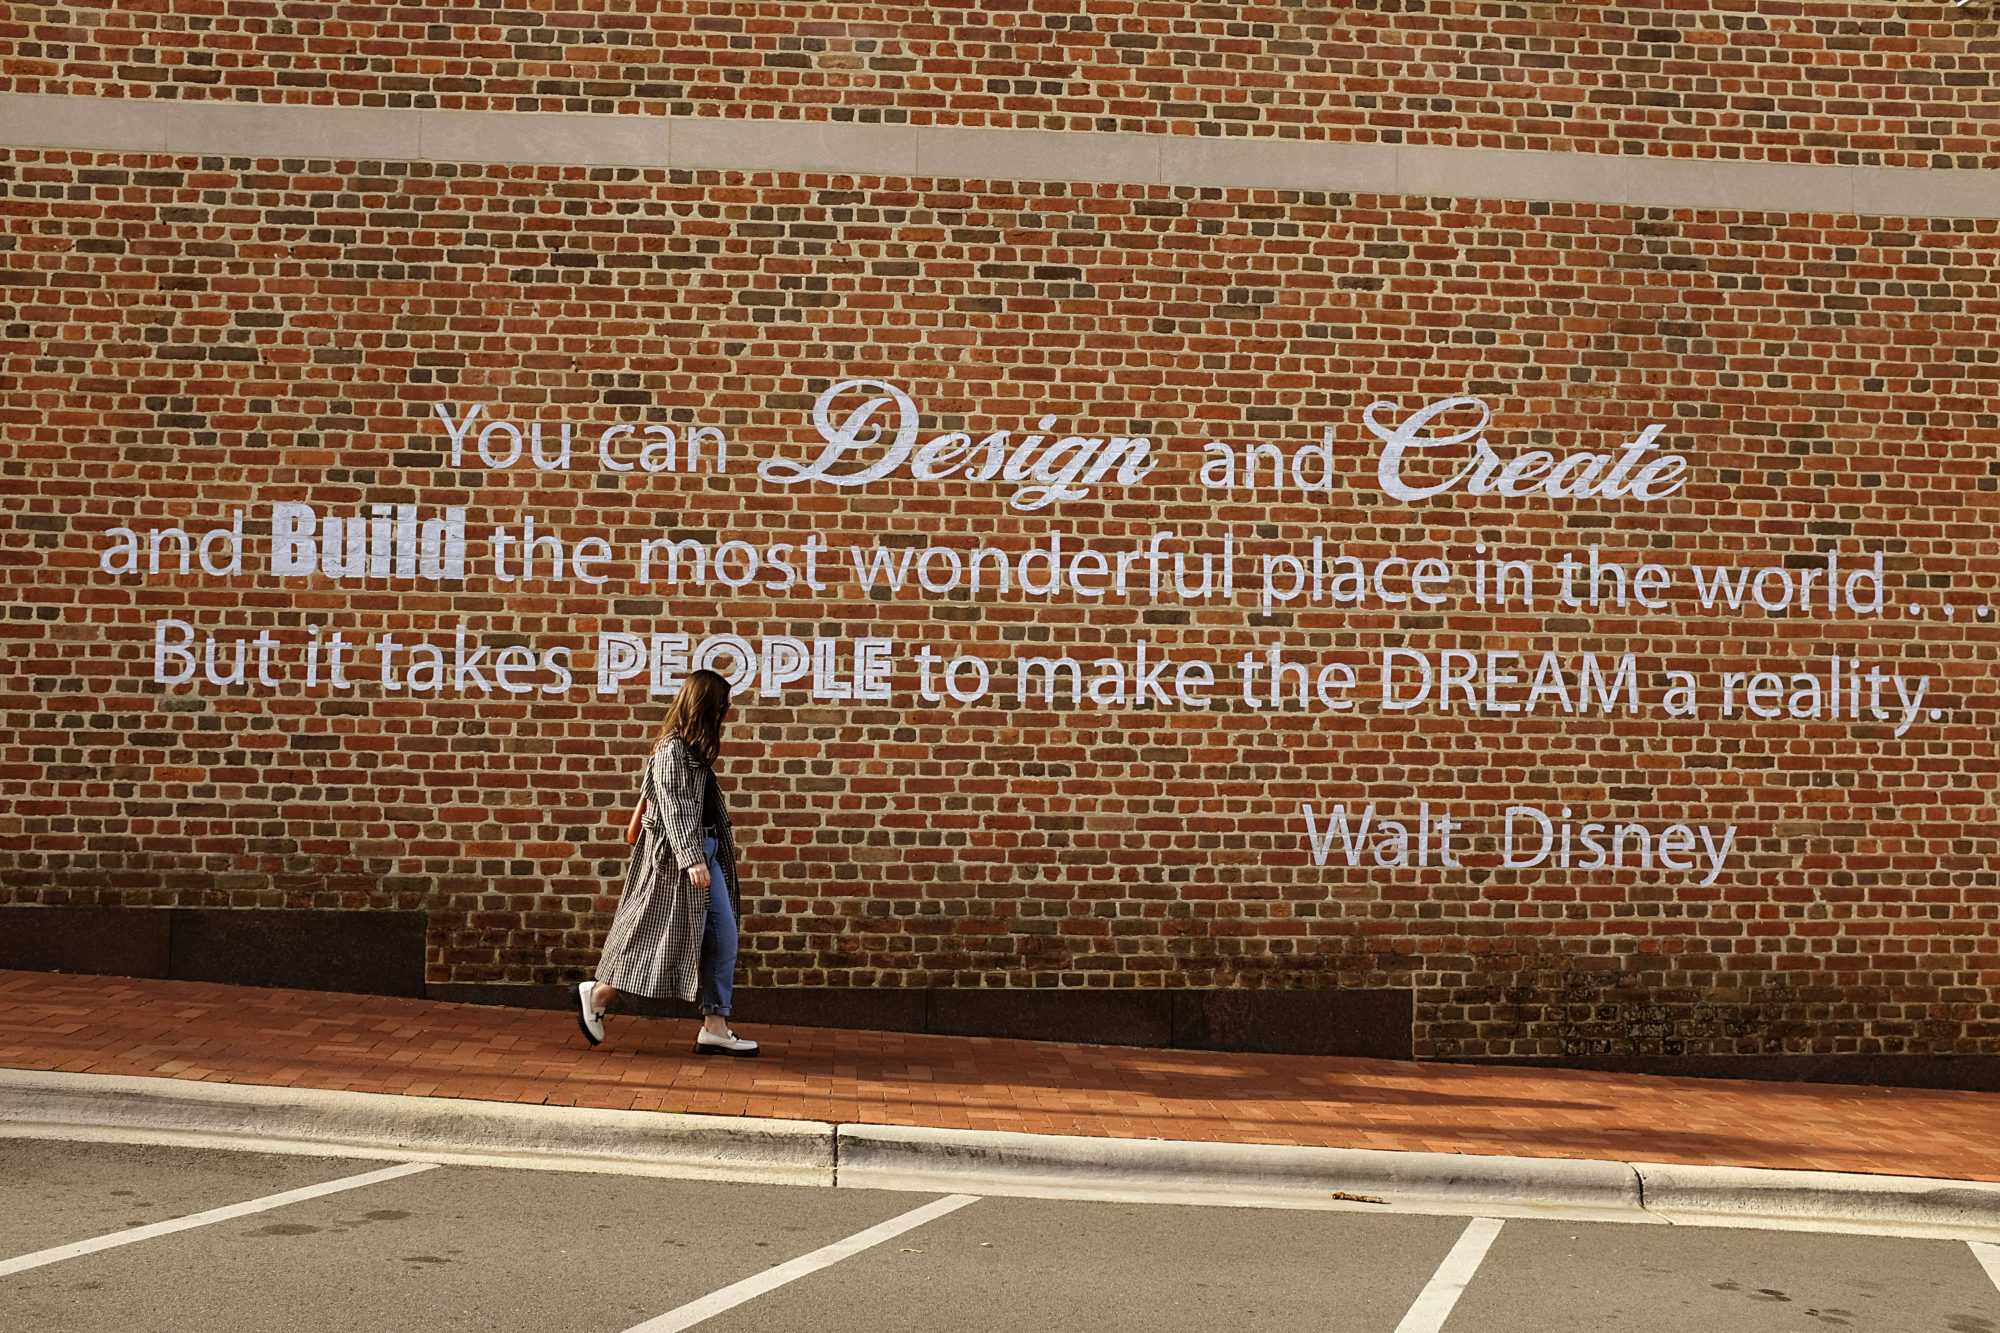 Alyssa walks past a mural with a quote from Walt Disney